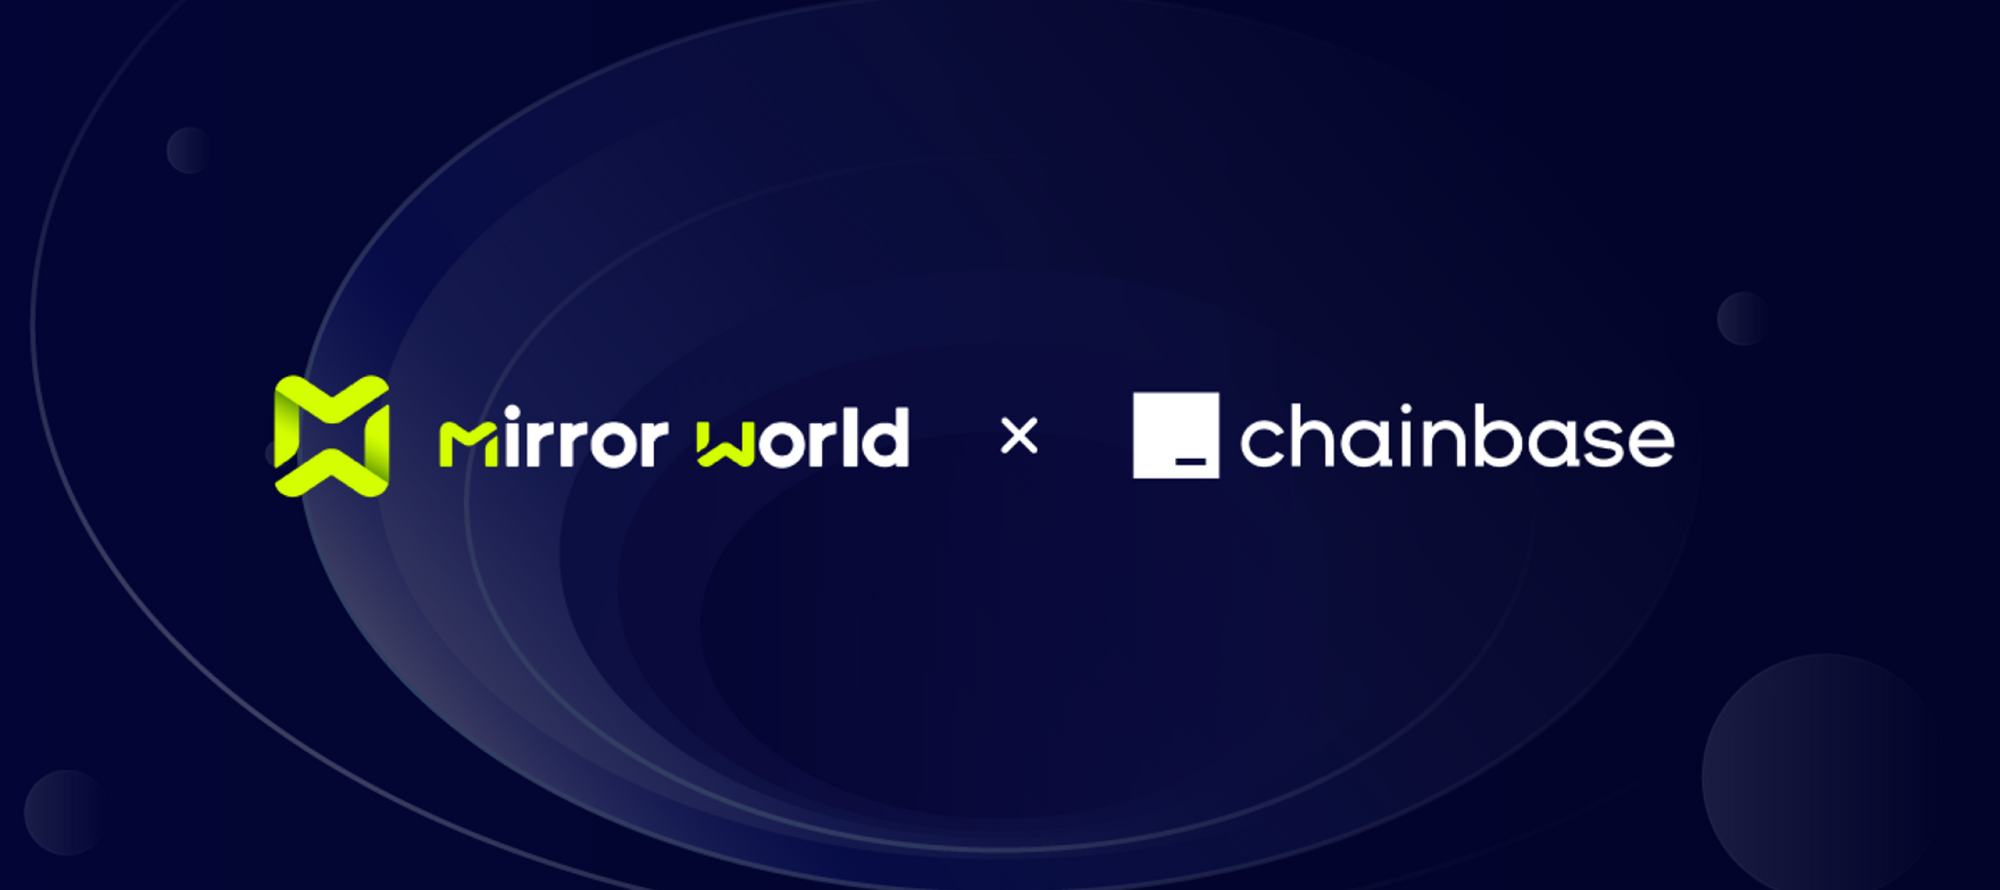 Mirror World & Chainbase : Focus on All-in-One Development Experience